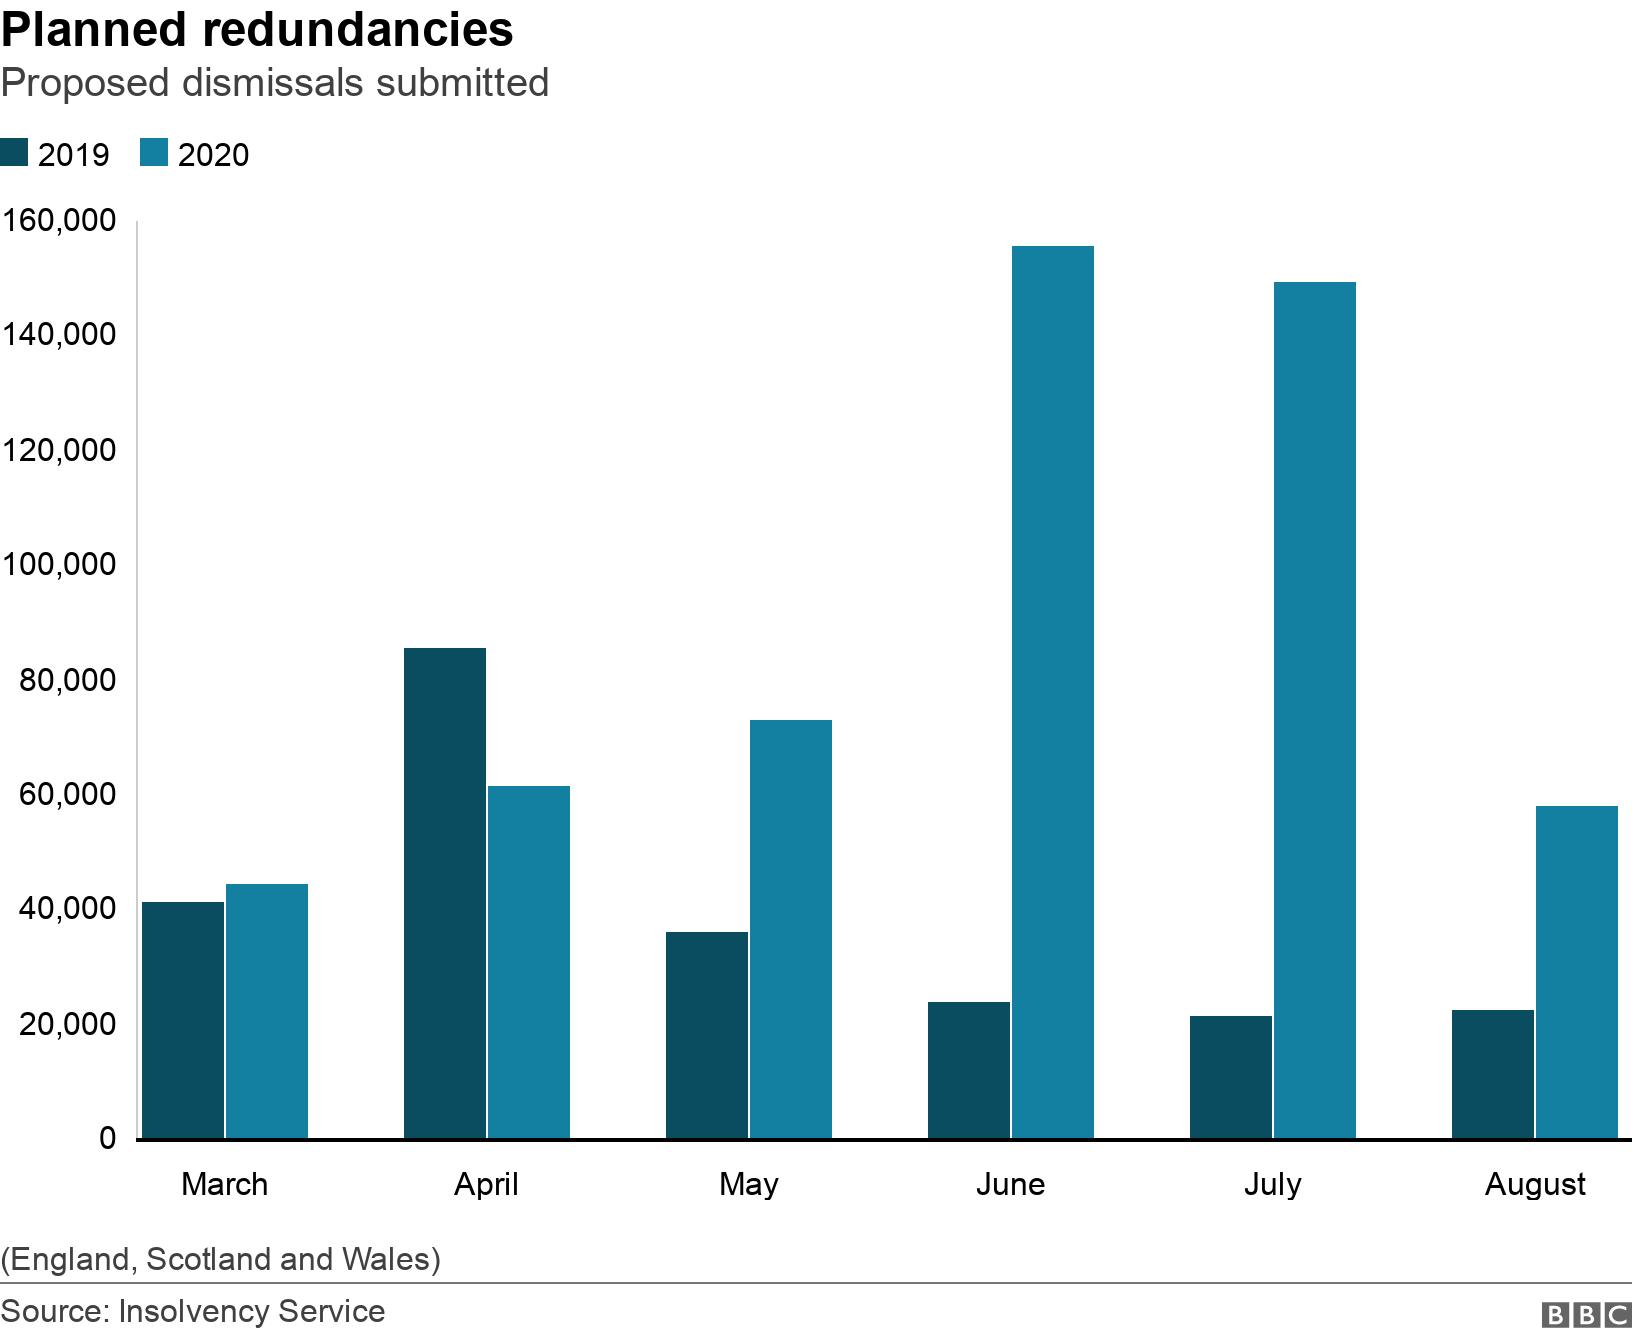 Planned redundancies. Proposed dismissals submitted. Columns showing the number of planned redundancies submitted in the months from March to August 2020 compared with 2019 (England, Scotland and Wales).